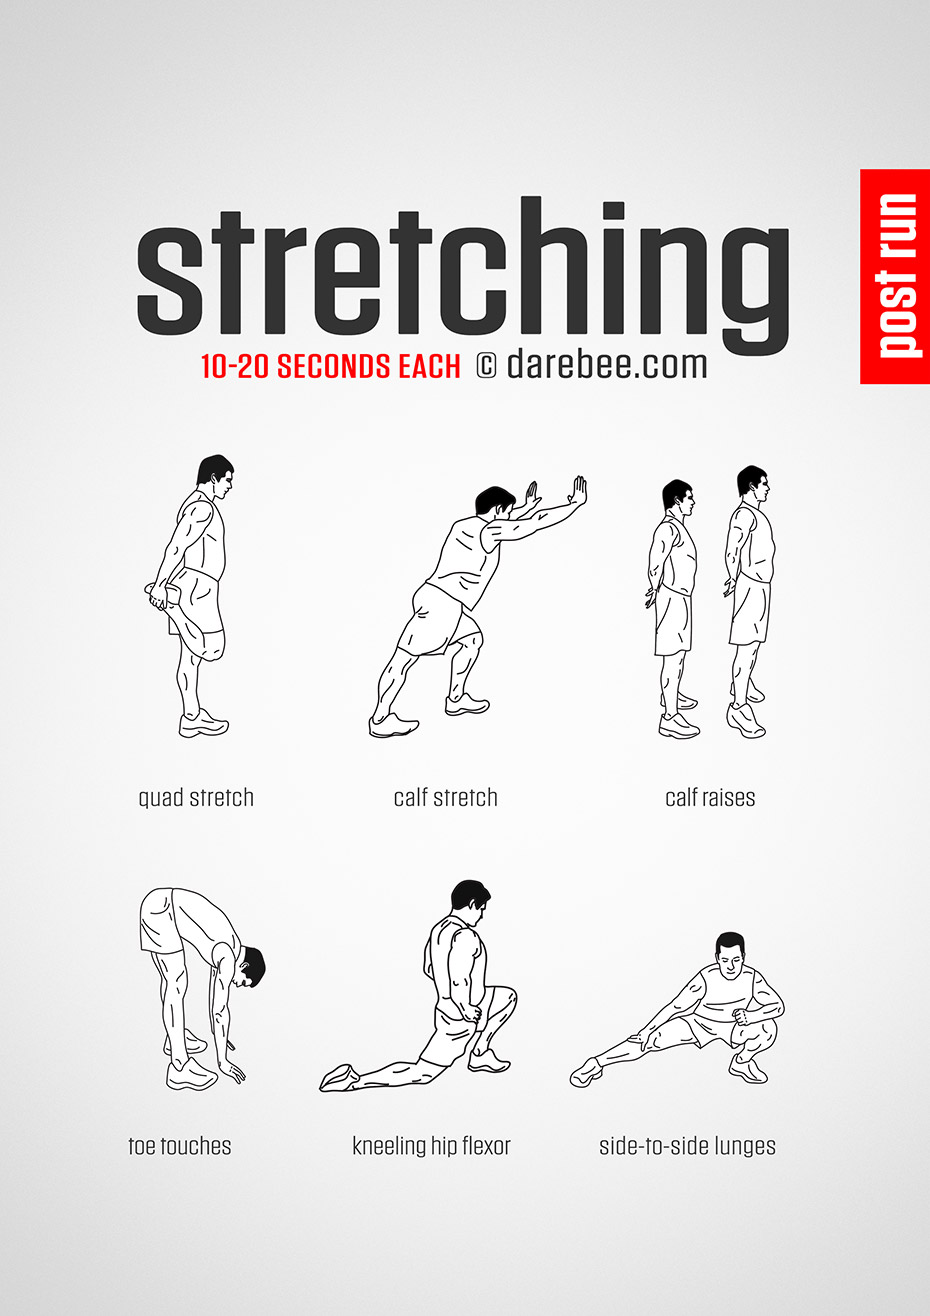 I. The Benefits of Regular Stretching for Runners